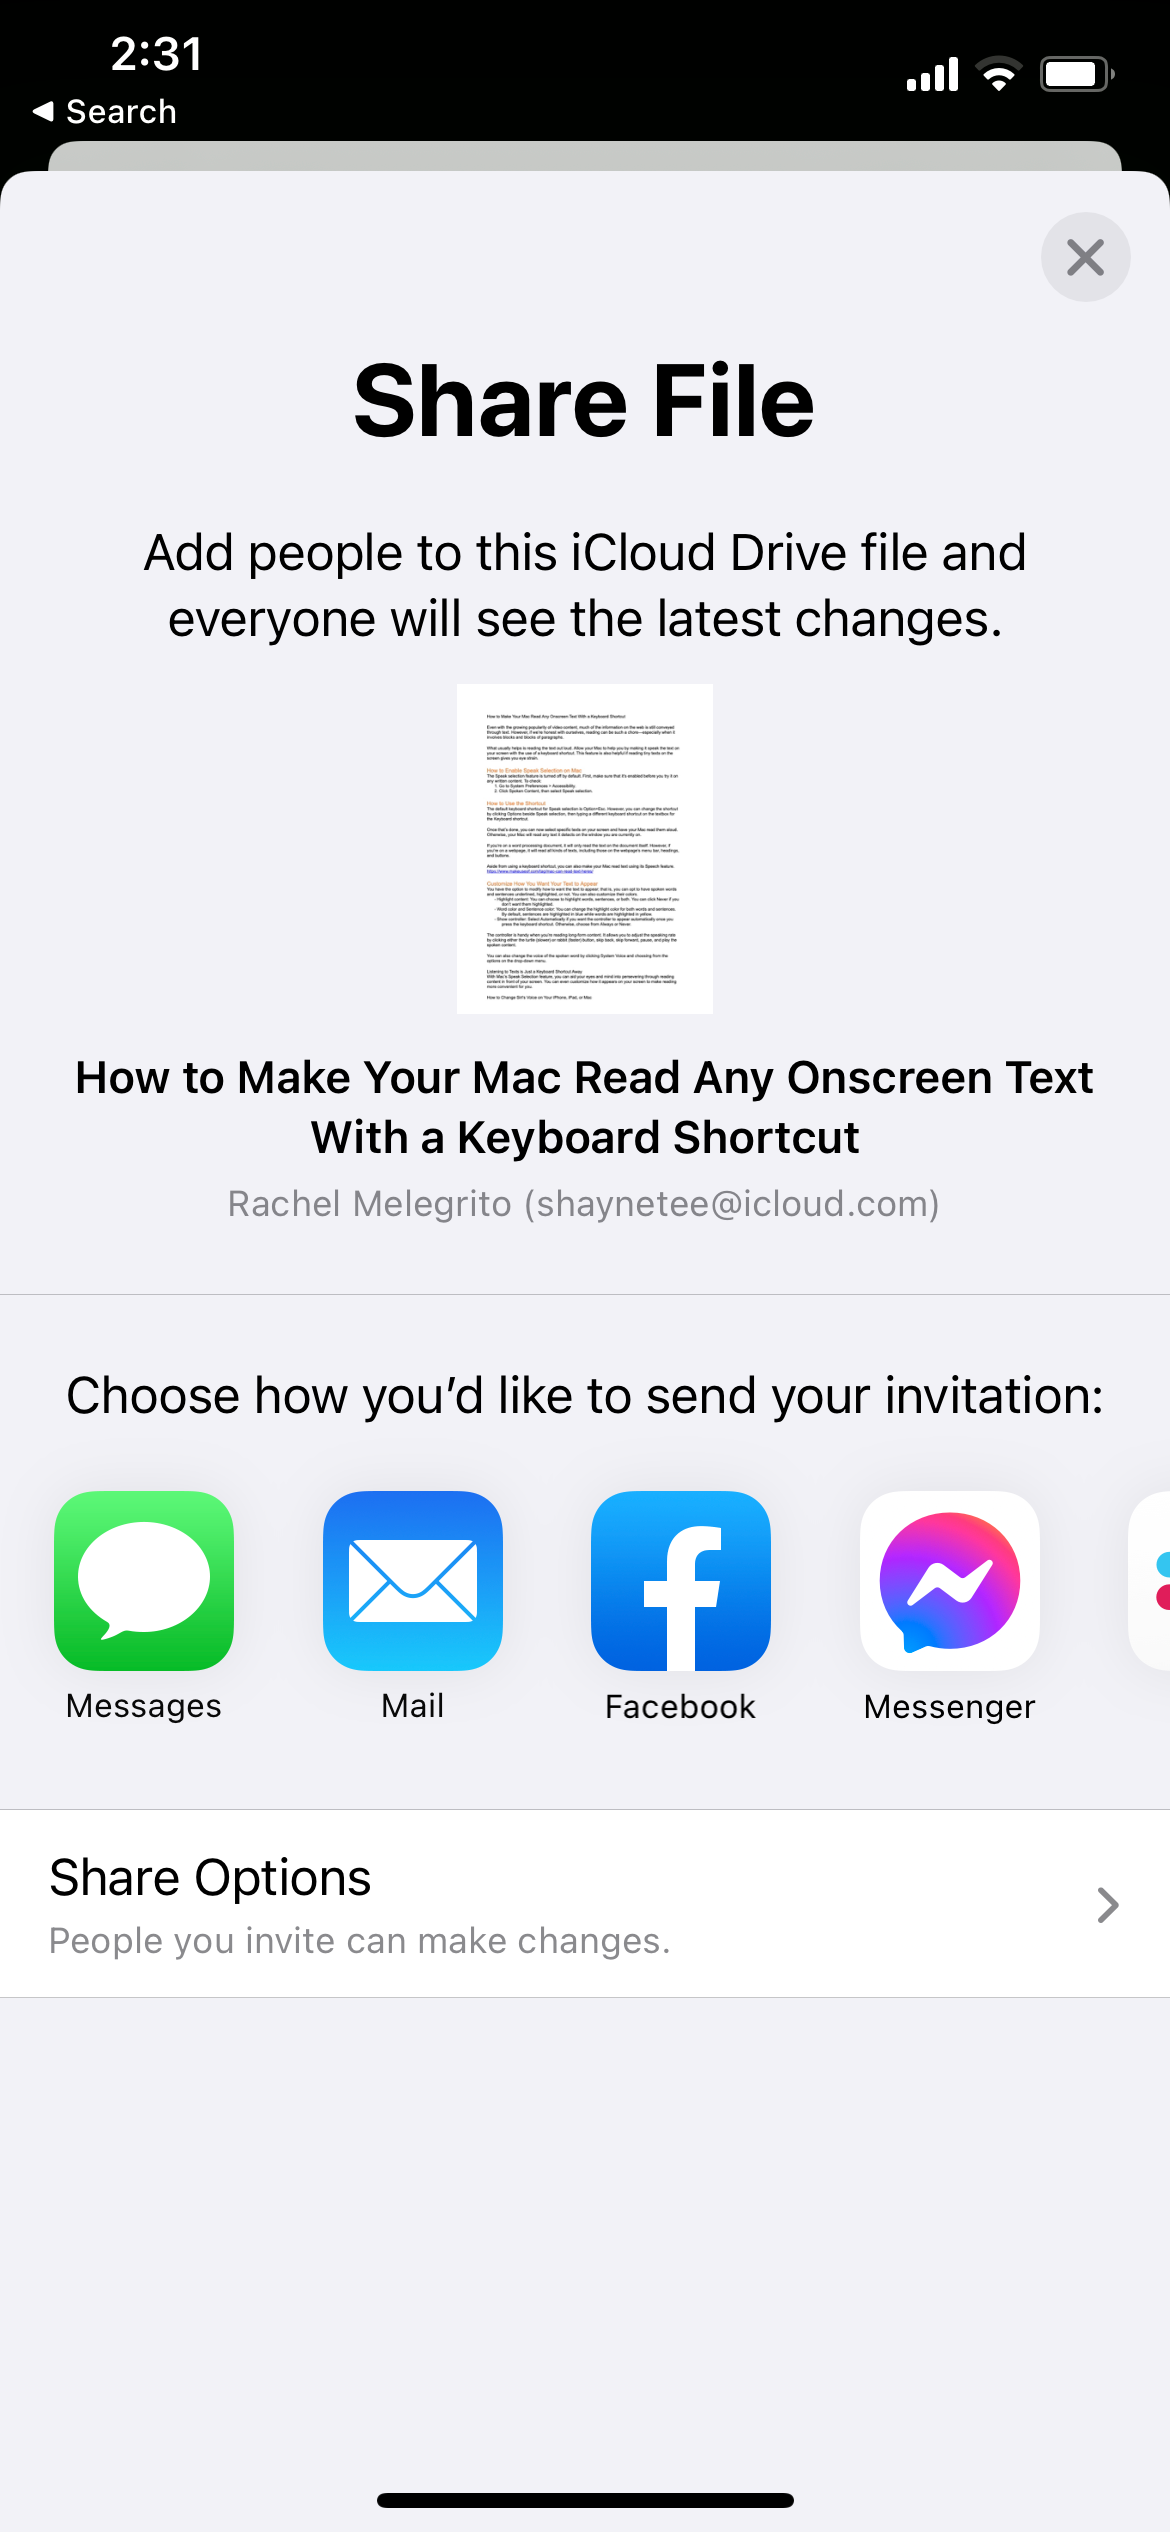 Share File Options on iPhone